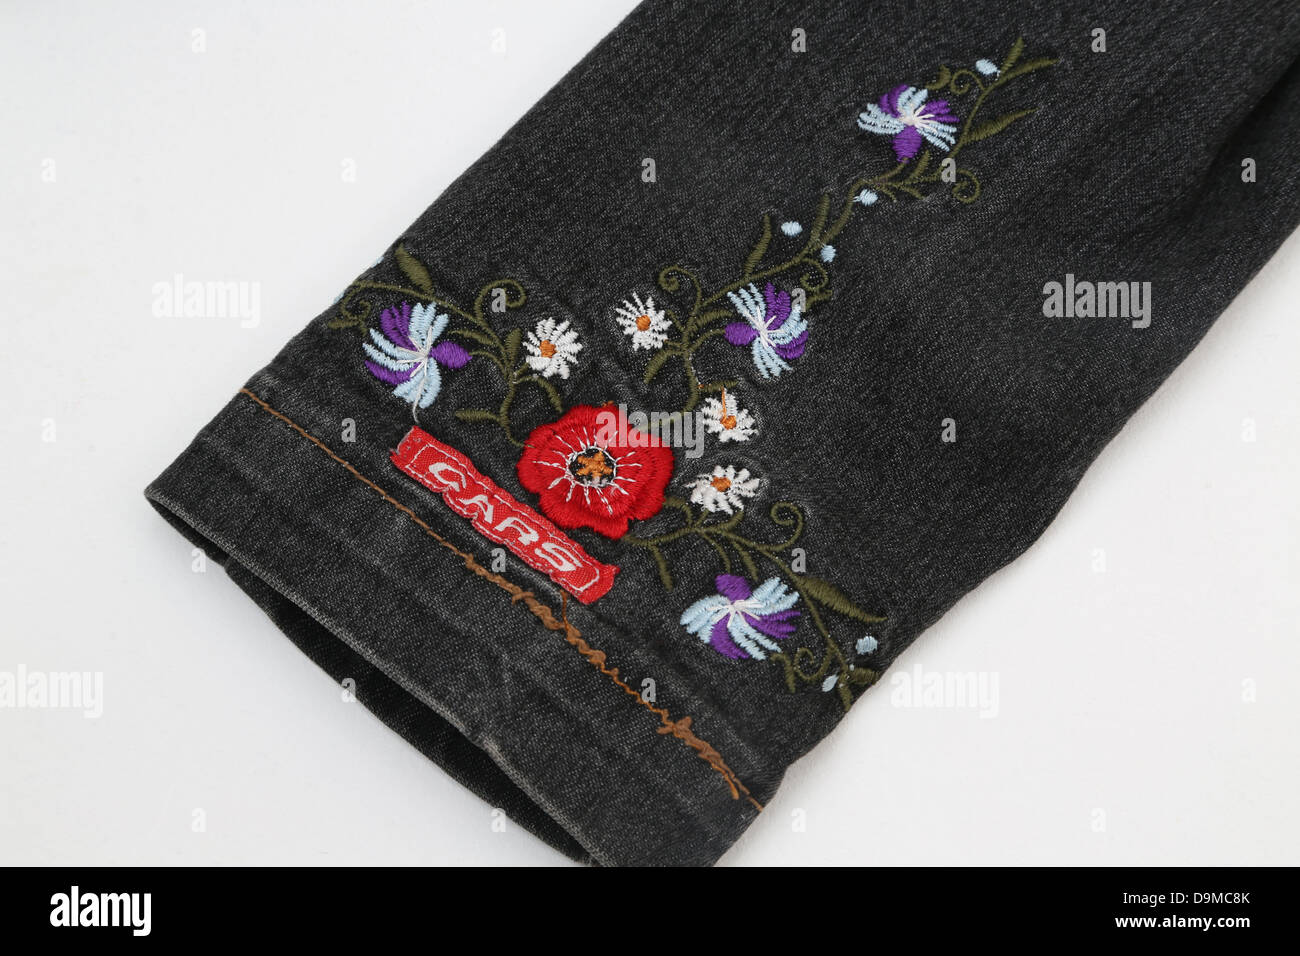 CARS Jeans Denim Jacket With Floral Pattern Embroidery Sleeve Stock Photo